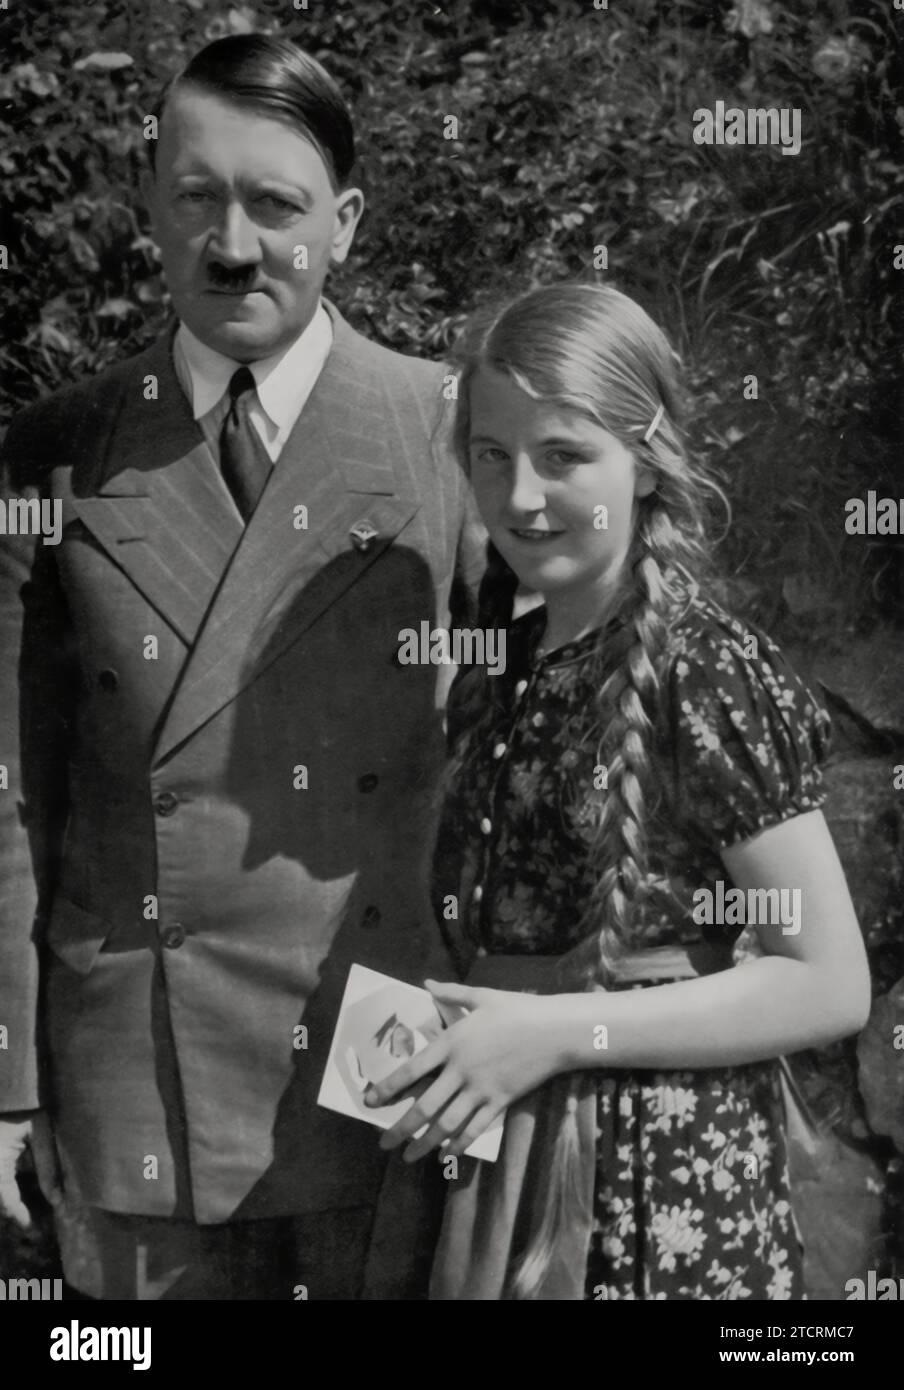 After receiving an autograph from Adolf Hitler, a young girl is fortunate enough to have her photograph taken with him. This image captures a personal and propagandistic moment, showcasing Hitler's interaction with the youth as part of the regime's efforts to portray him as a benevolent and approachable leader. Such staged encounters were instrumental in shaping public perception and fostering a sense of personal connection between Hitler and the German people, especially the younger generation. Stock Photo